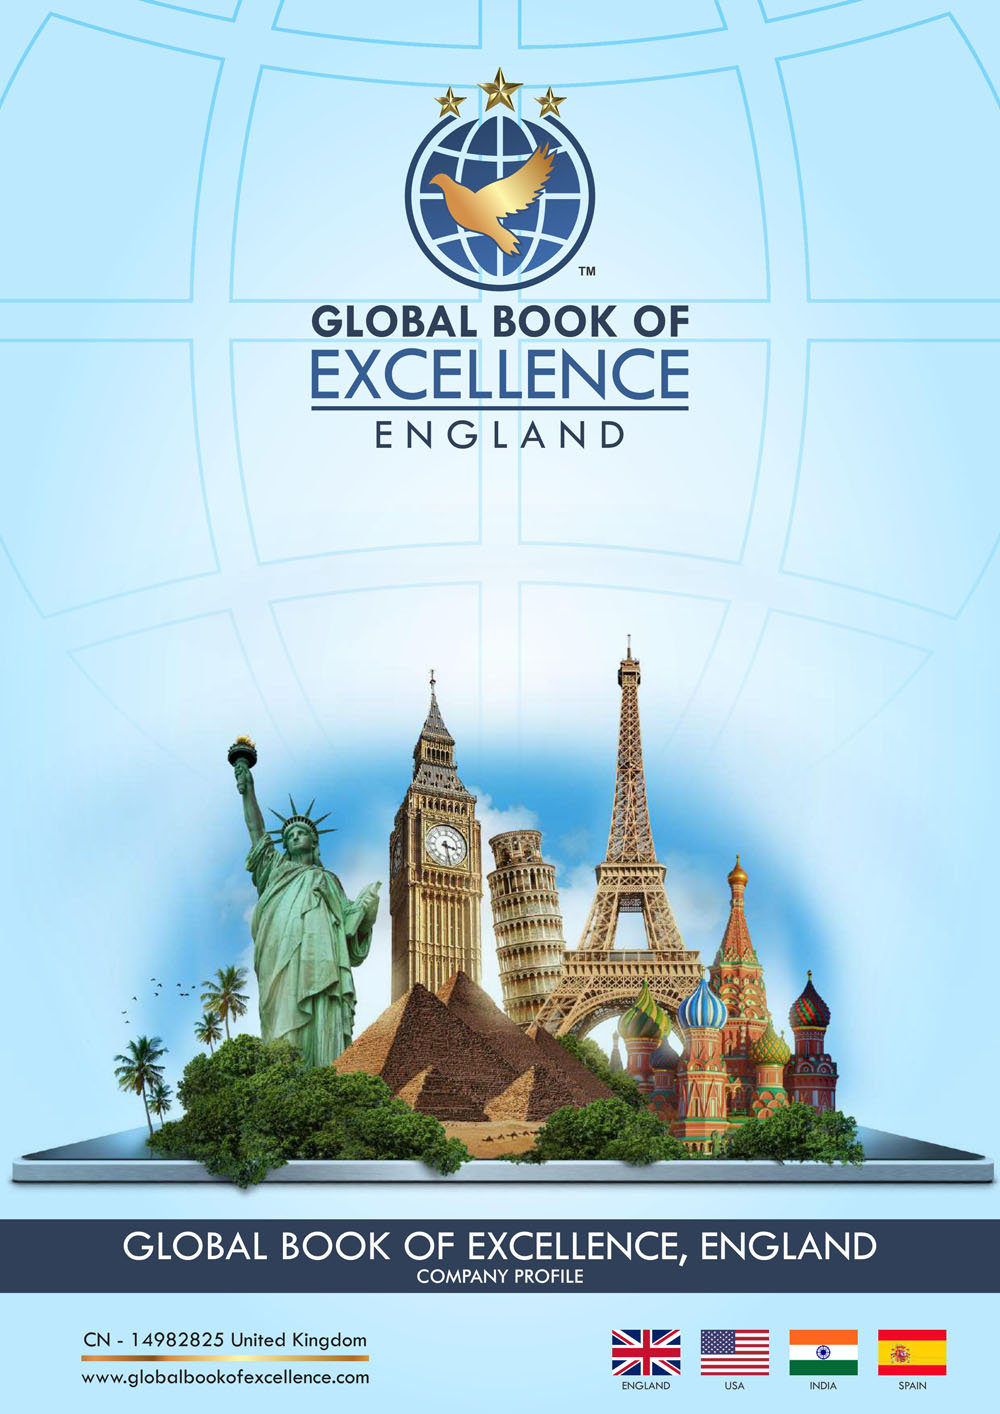 https://globalbookofexcellence.com/wp-content/uploads/2024/02/global-book-of-excellence-images-1.jpg